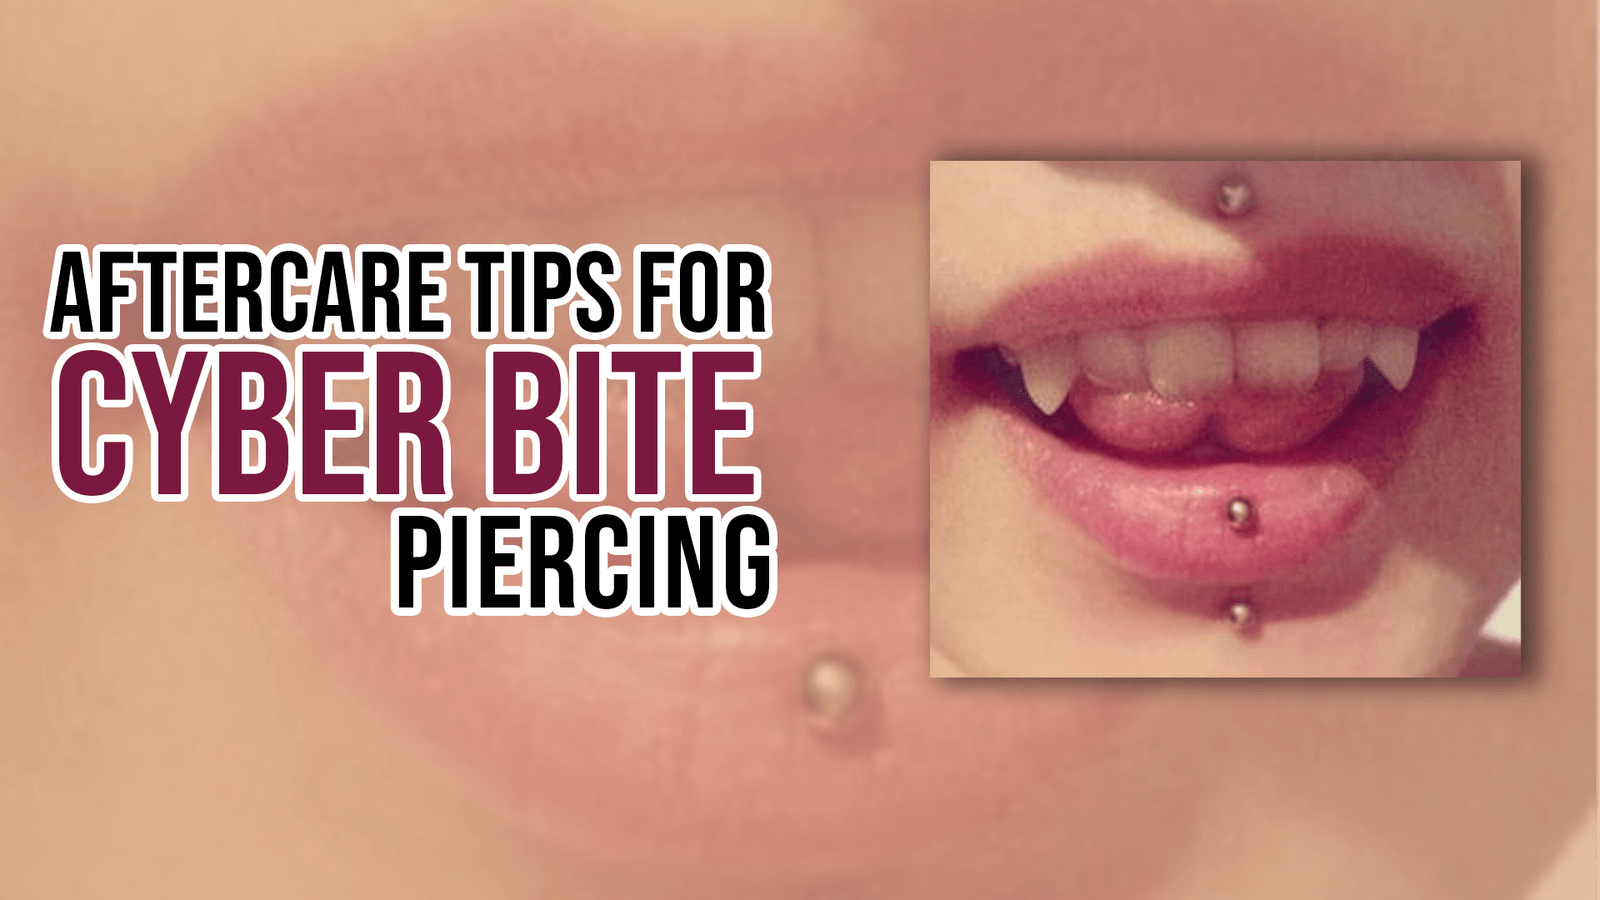 Aftercare Tips for Cyber Bite Piercing